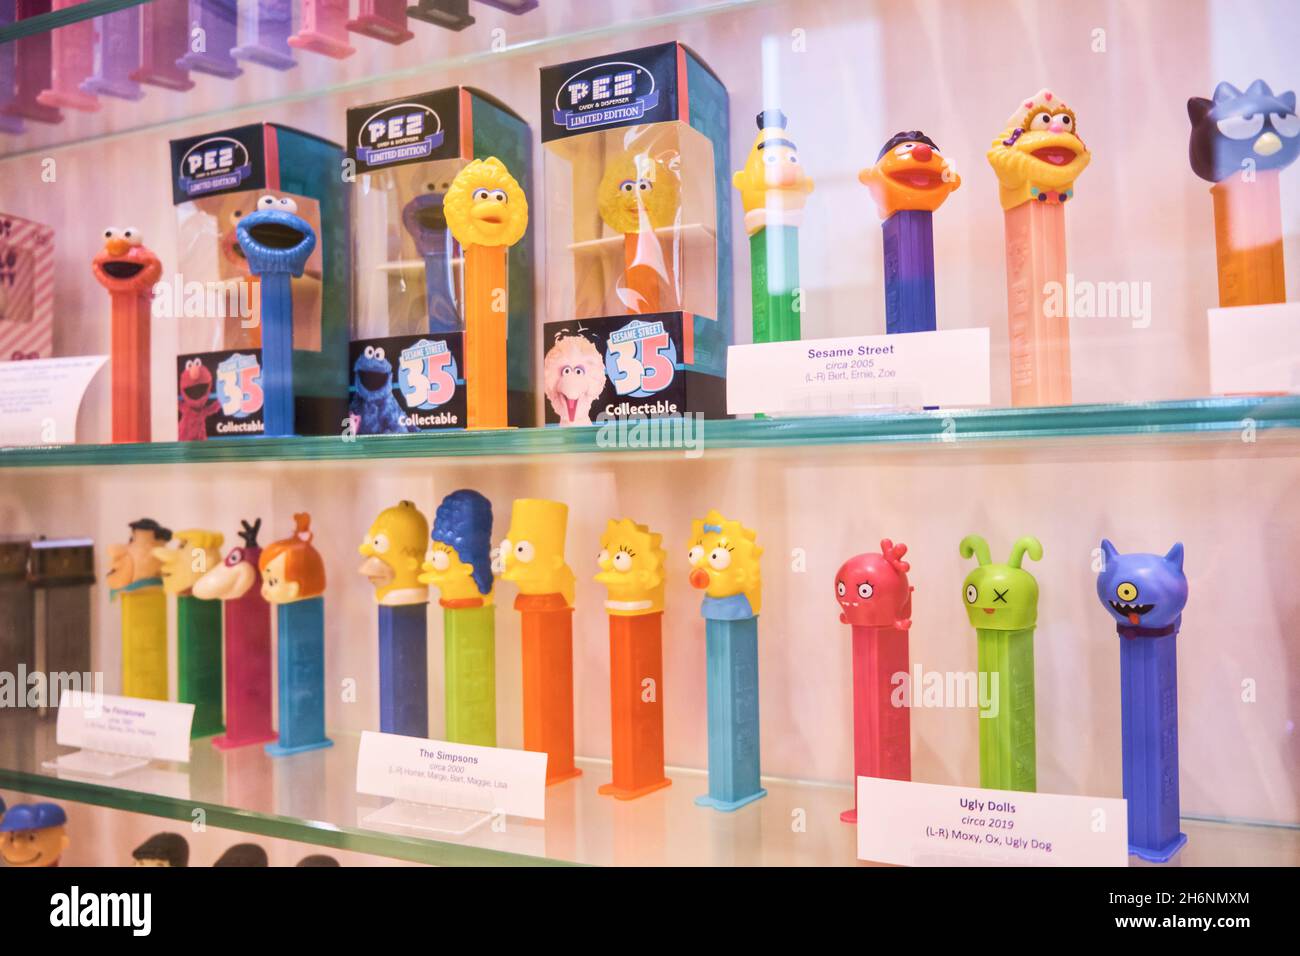 Sesame Street, Simpsons, Ugly Dolls, Flintstones dispensers. At the Pez factory, museum, visitor center in Orange, Connecticut. Stock Photo